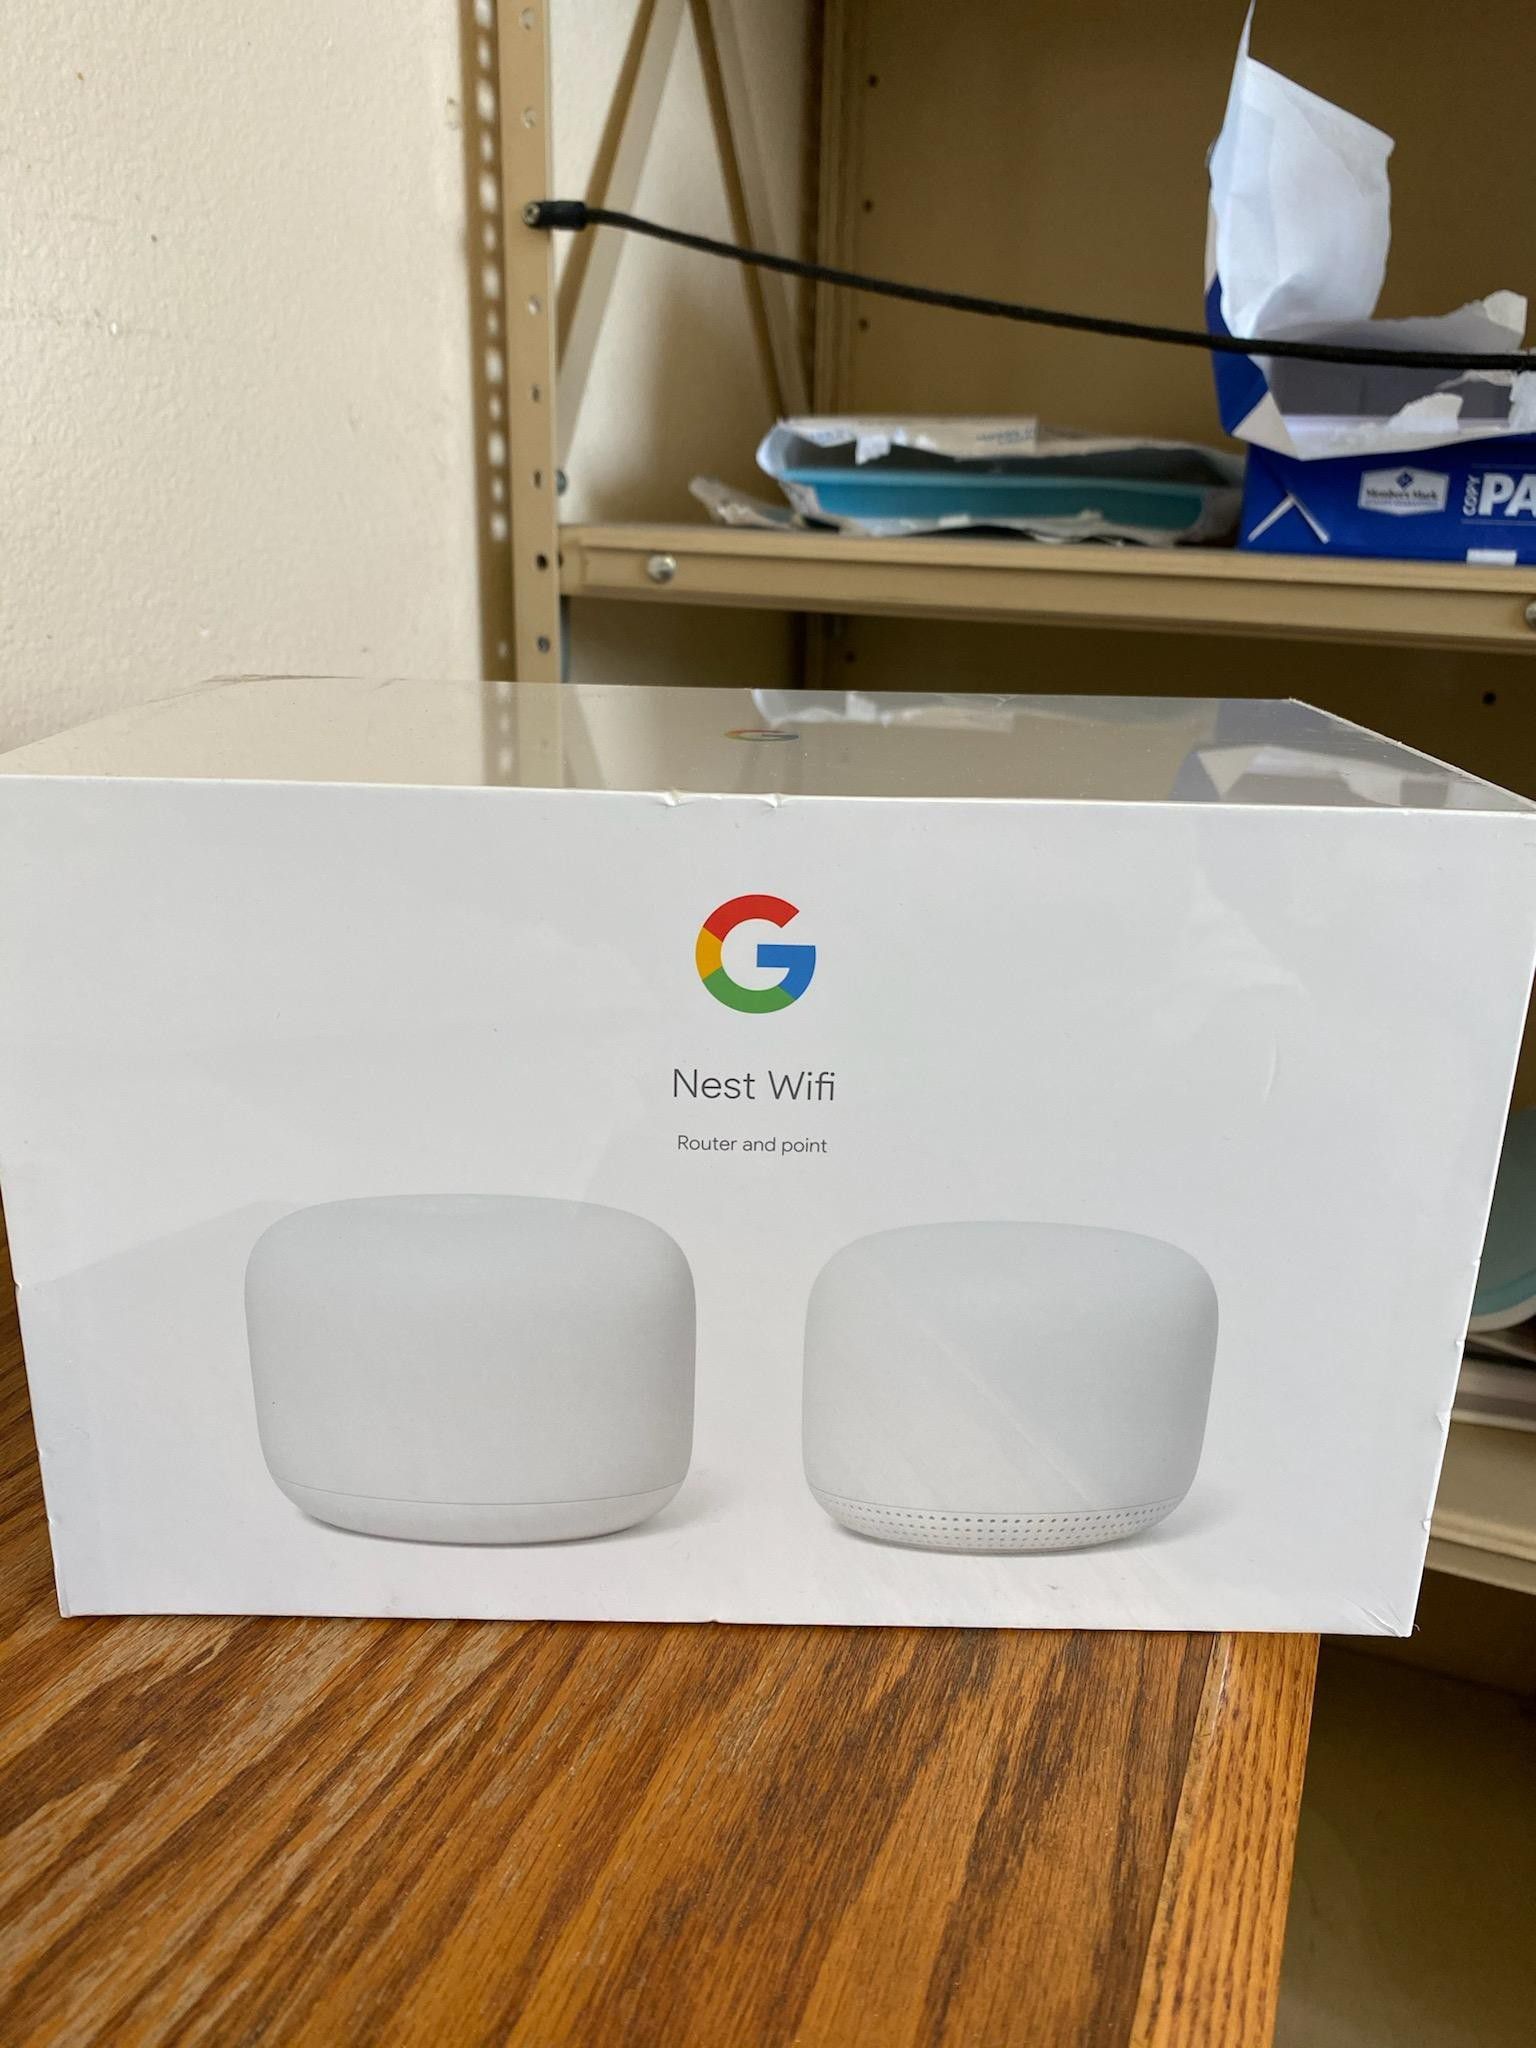 Google Nest WiFi Router and Point 2-Pack System